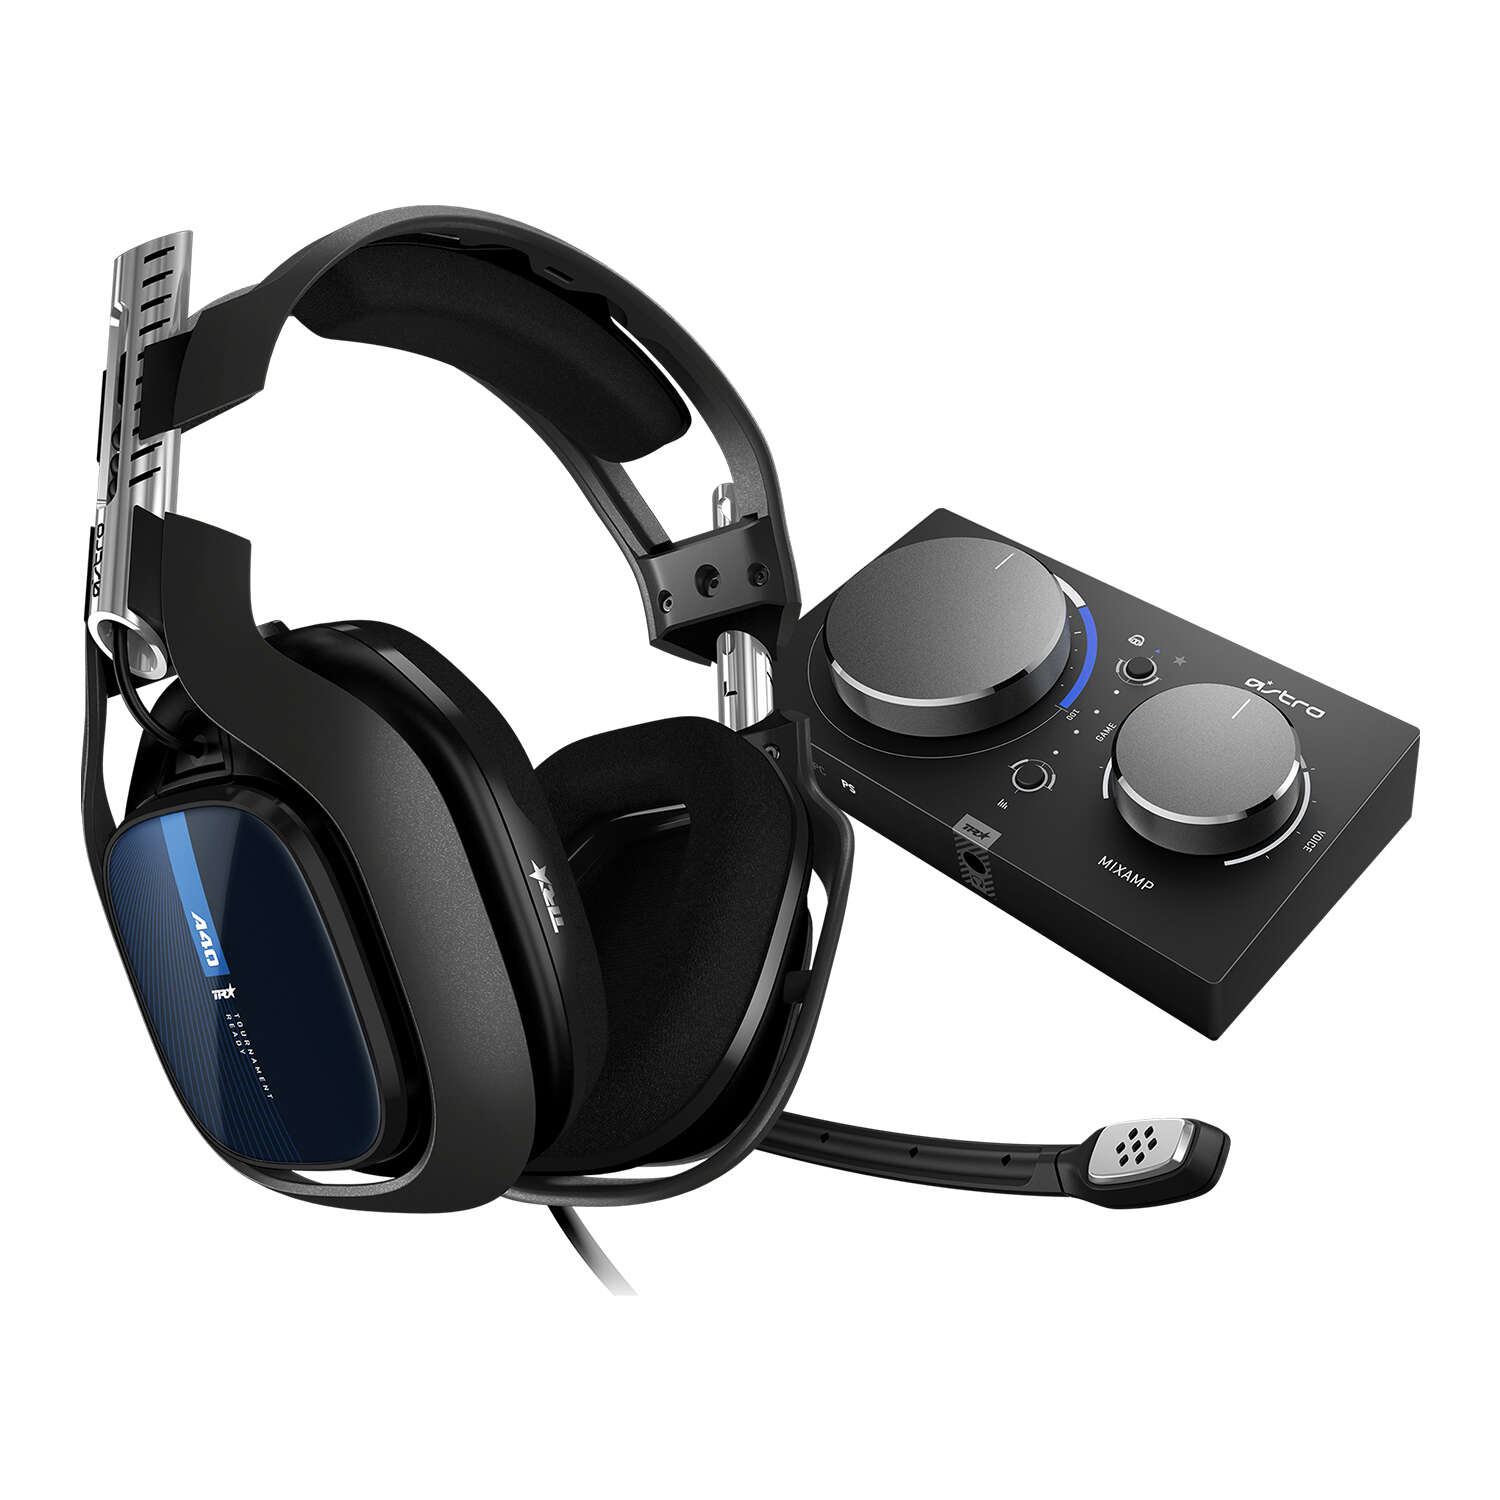 Logitech astro gaming a40 tr headset + mixamp pro tr for ps4 & pc vezetéke...